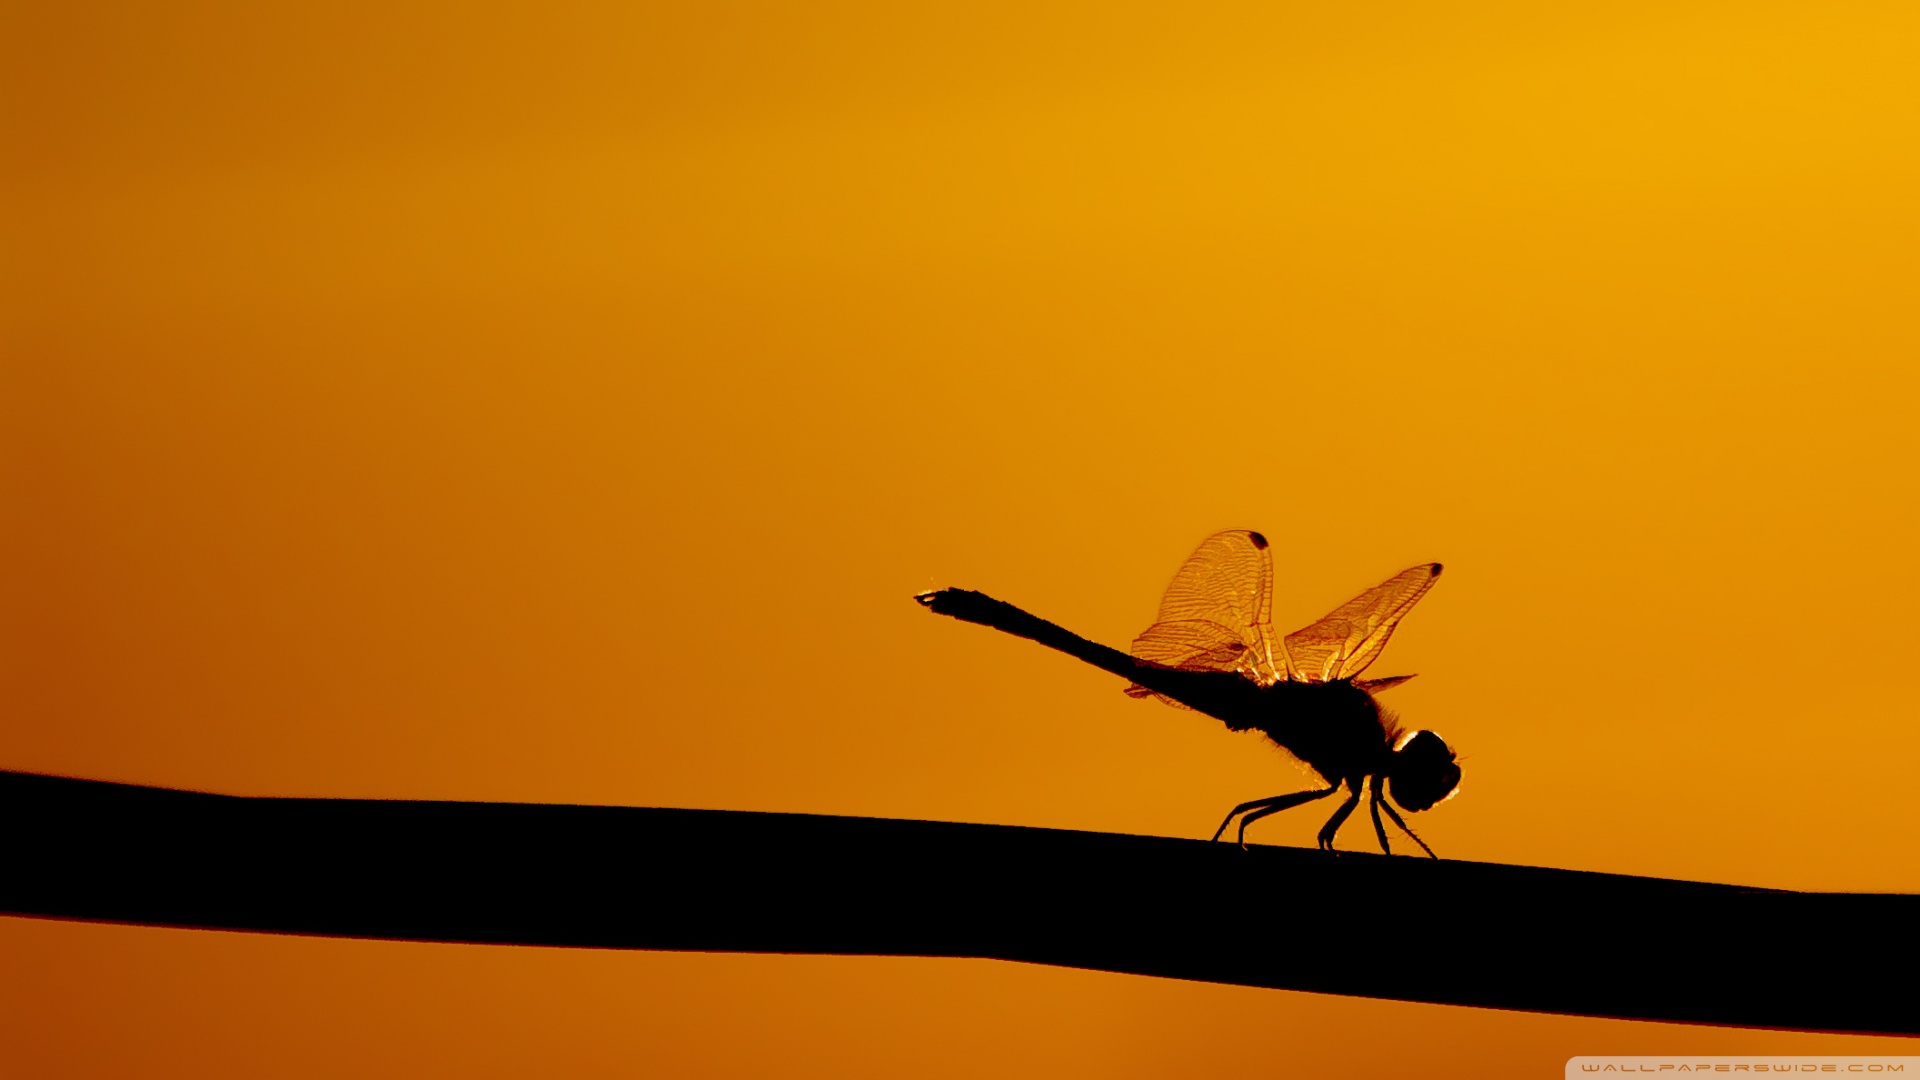 Stick Wallpaper Dragonfly Image